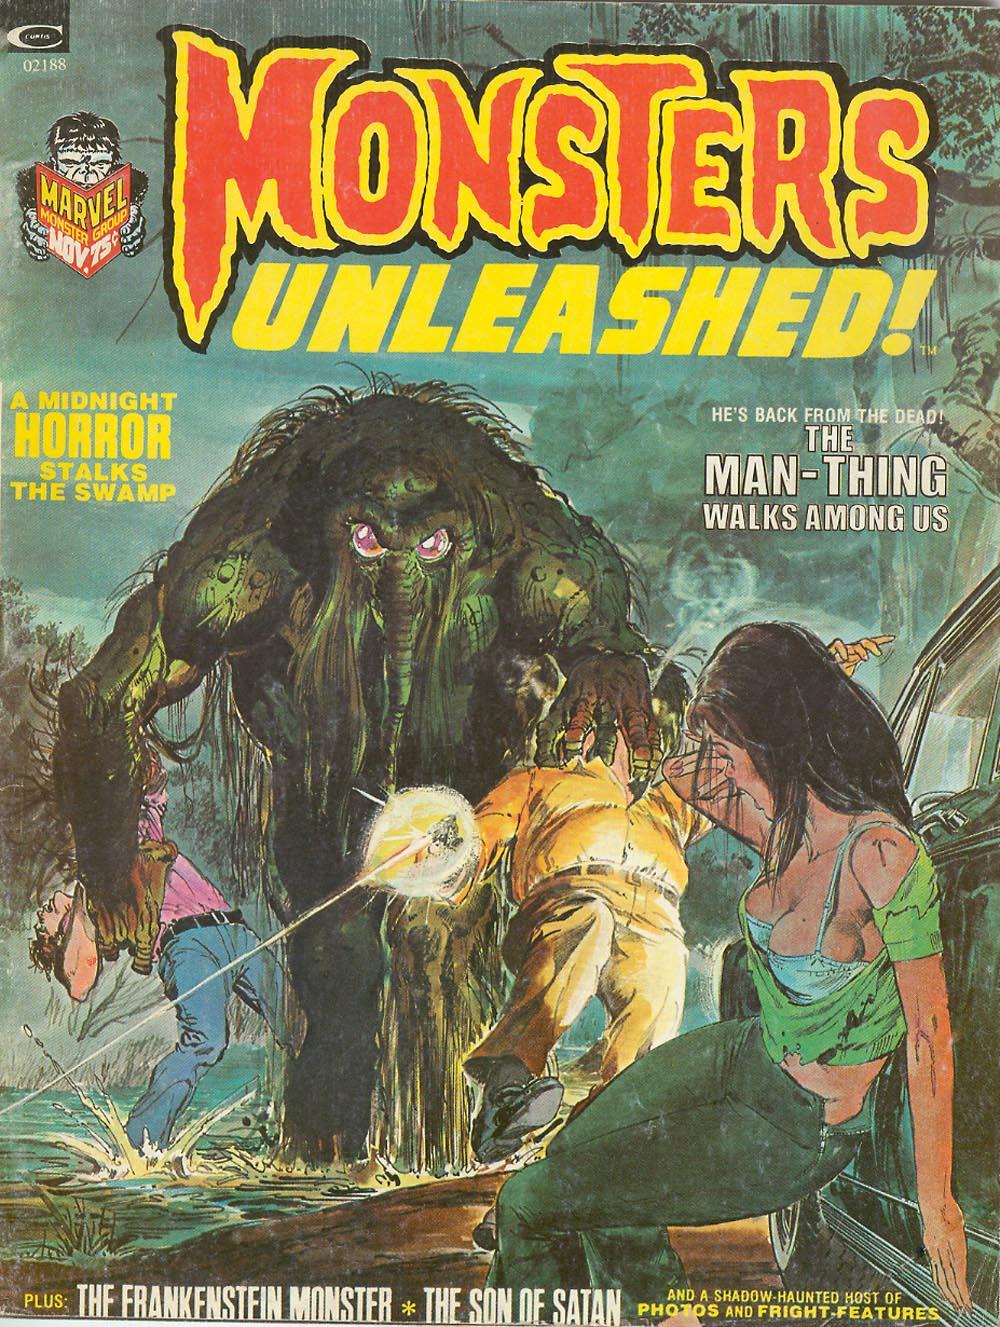 Monsters Unleashed Vol. 1 #3